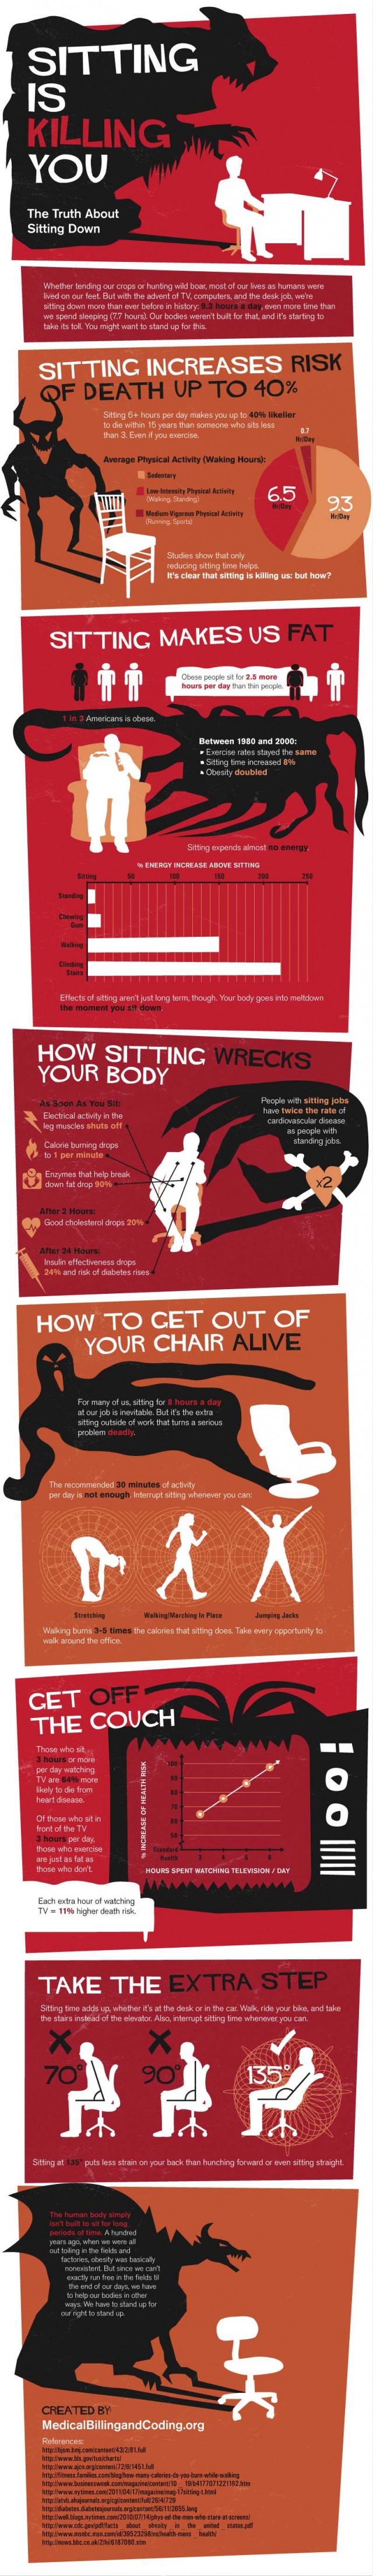 sitting-is-killing-you-infographic-640x4416